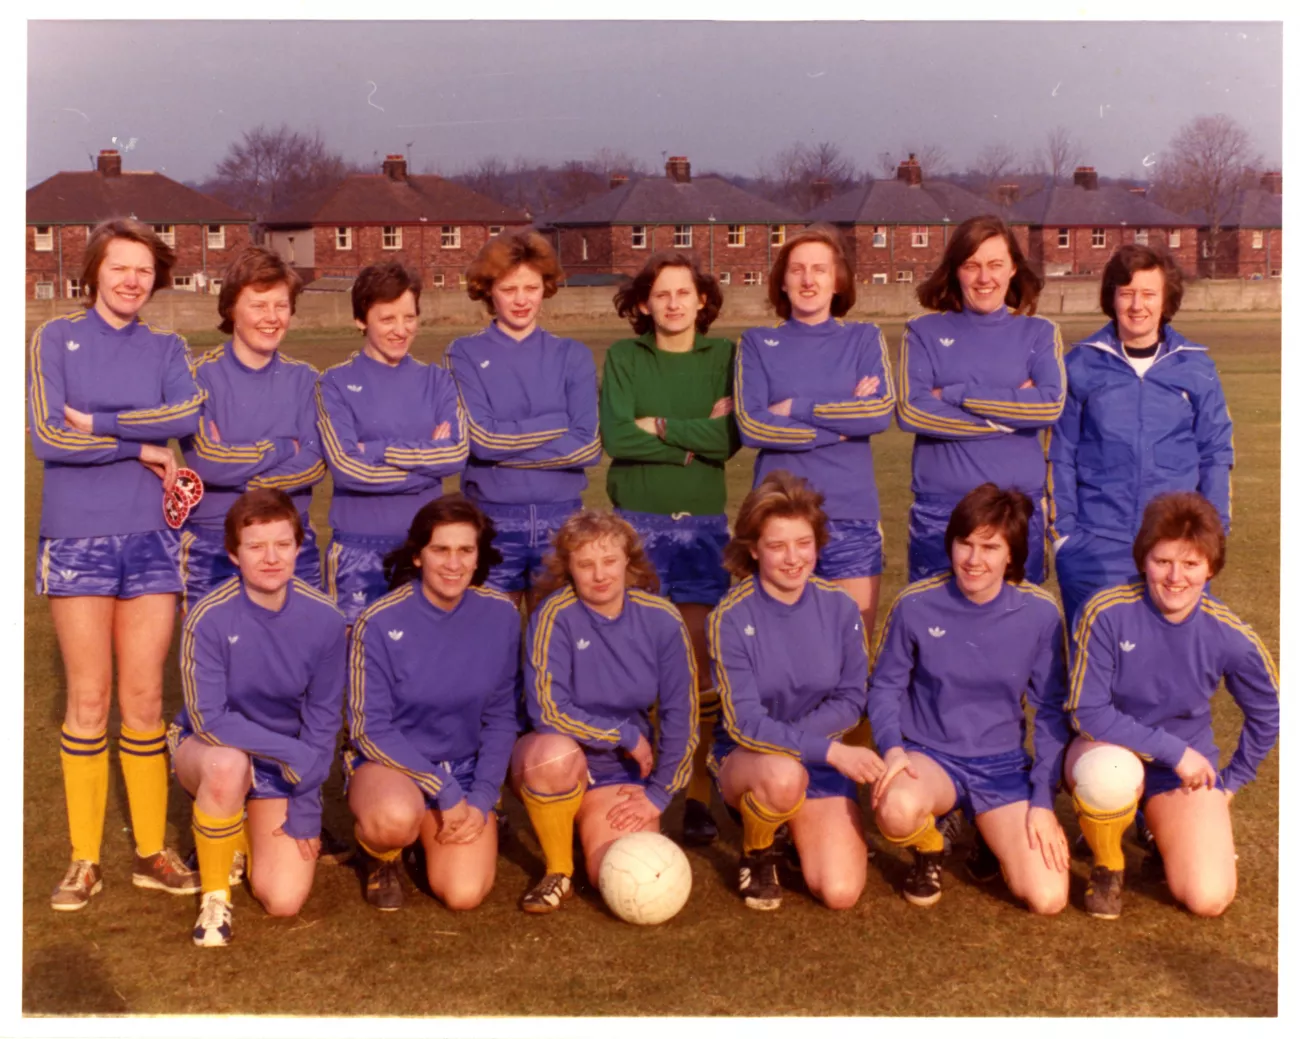 Group of women footballers line up for photo